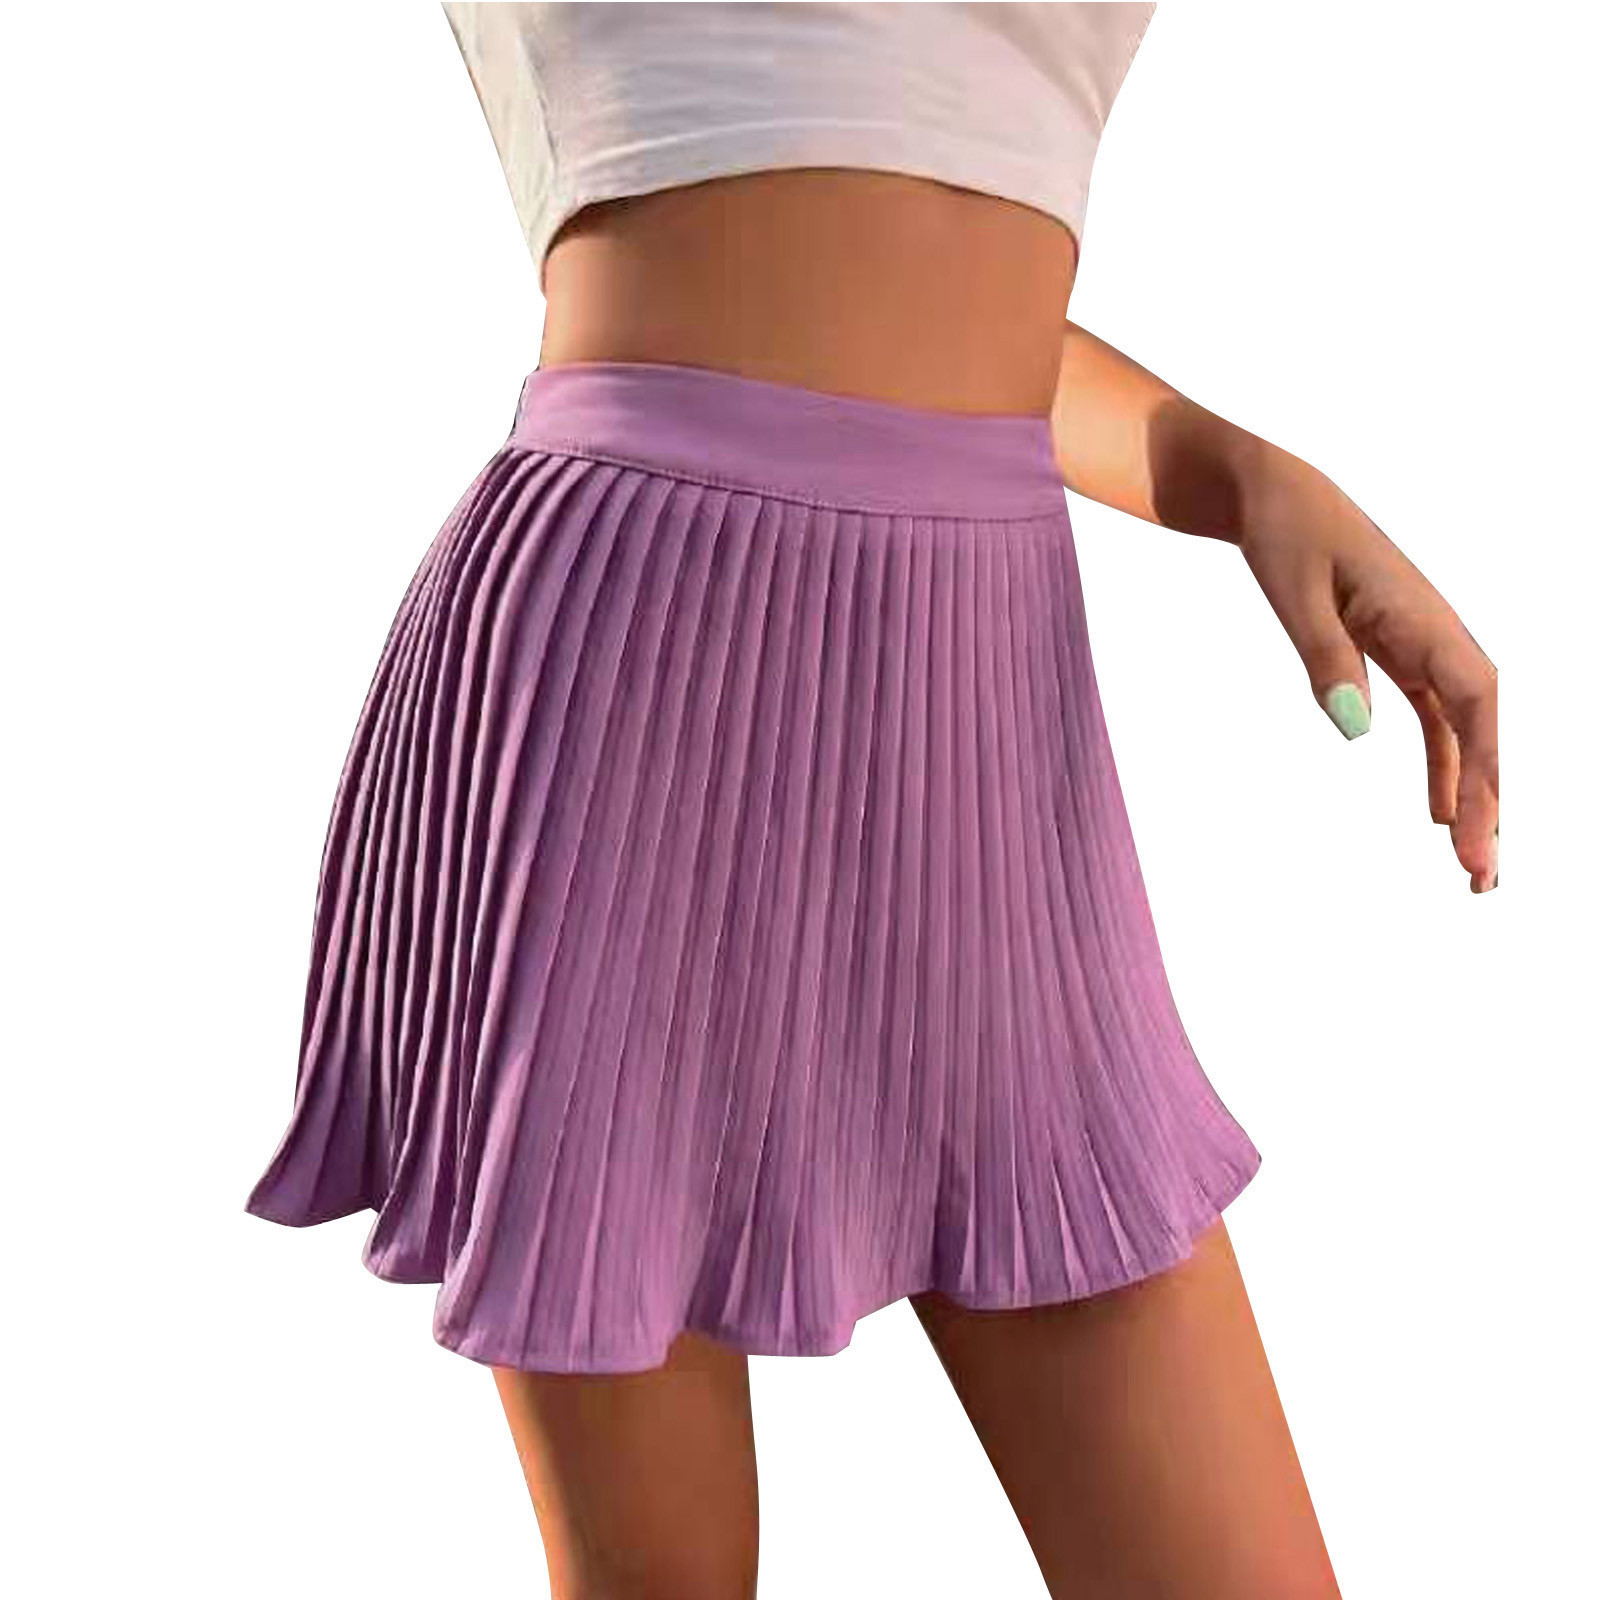 Skirts for Women Women's Summer Empire Waist Ruffle Tiered Pleated Mini Skirt Solid Color A Line Beach Cute Skirt Women's Skirts Purple M - image 2 of 7